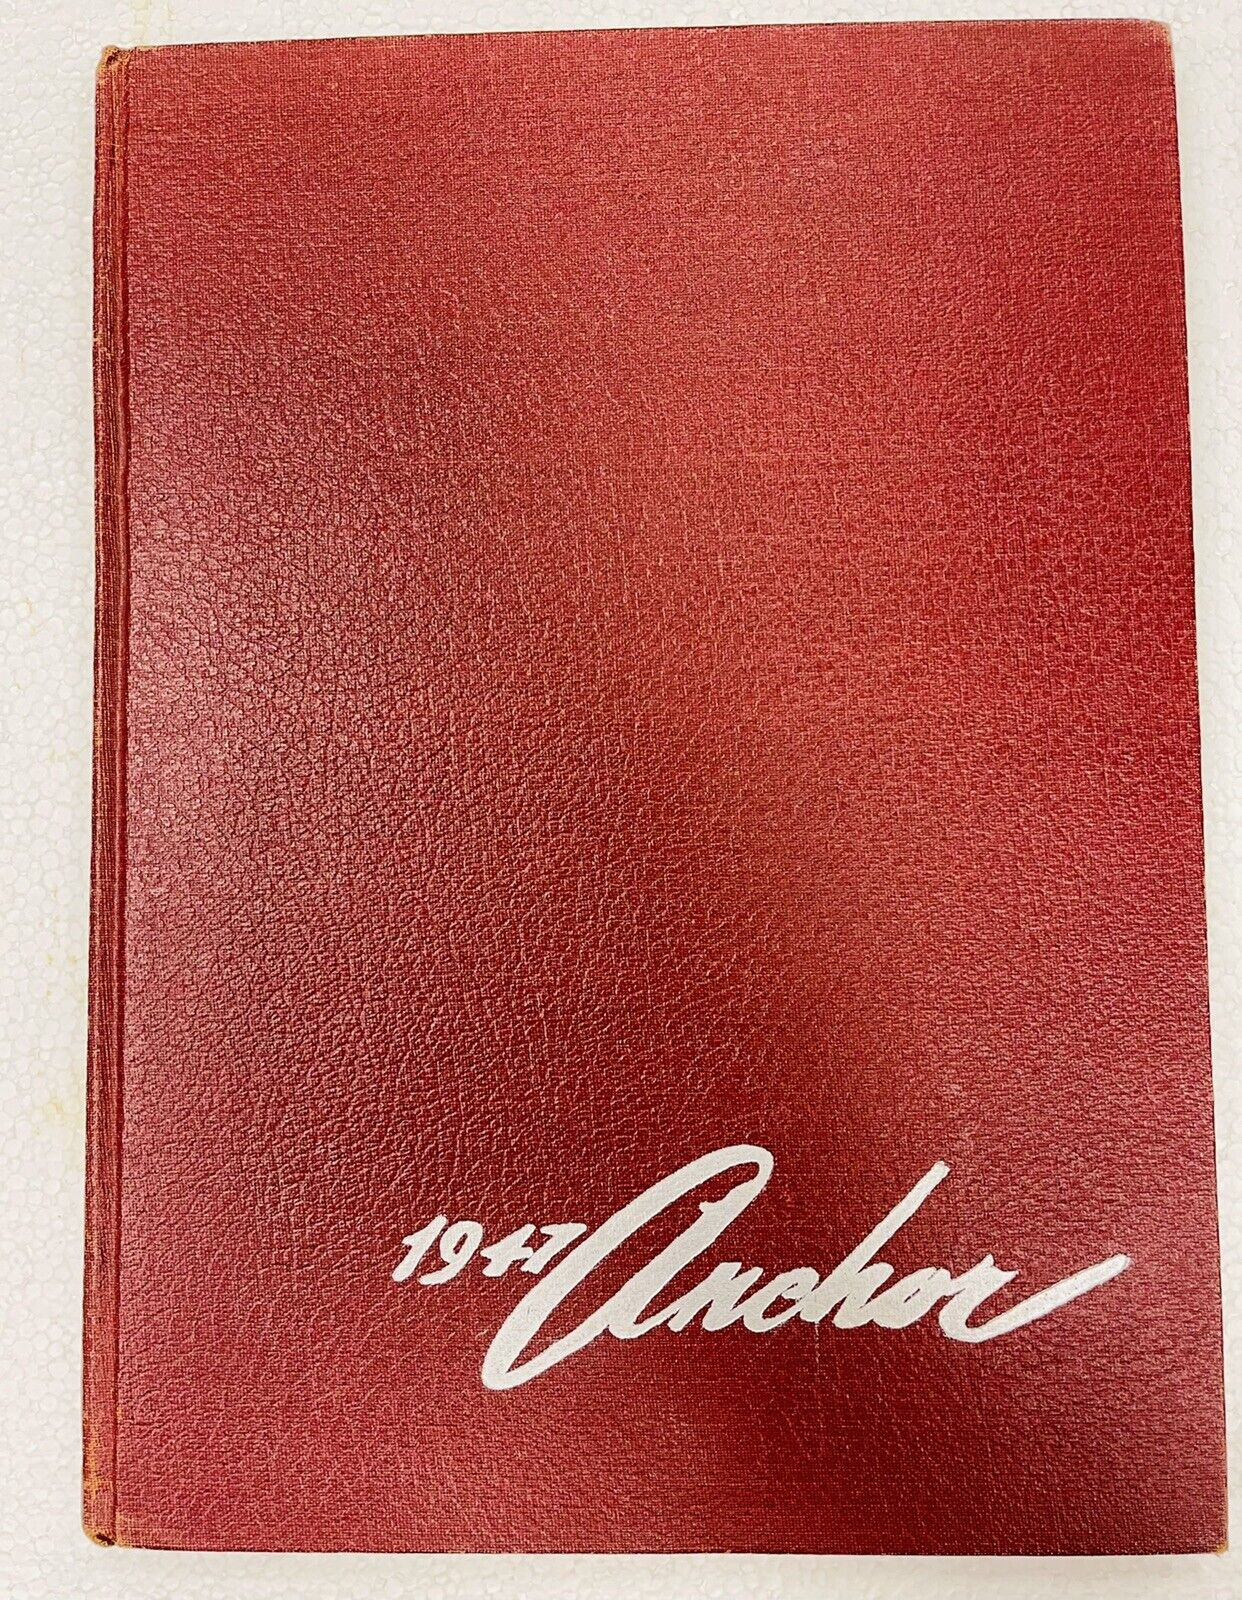 1947 SOUTHPORT HIGH SCHOOL SOUTHPORT INDIANA YEARBOOK  THE ACORN 